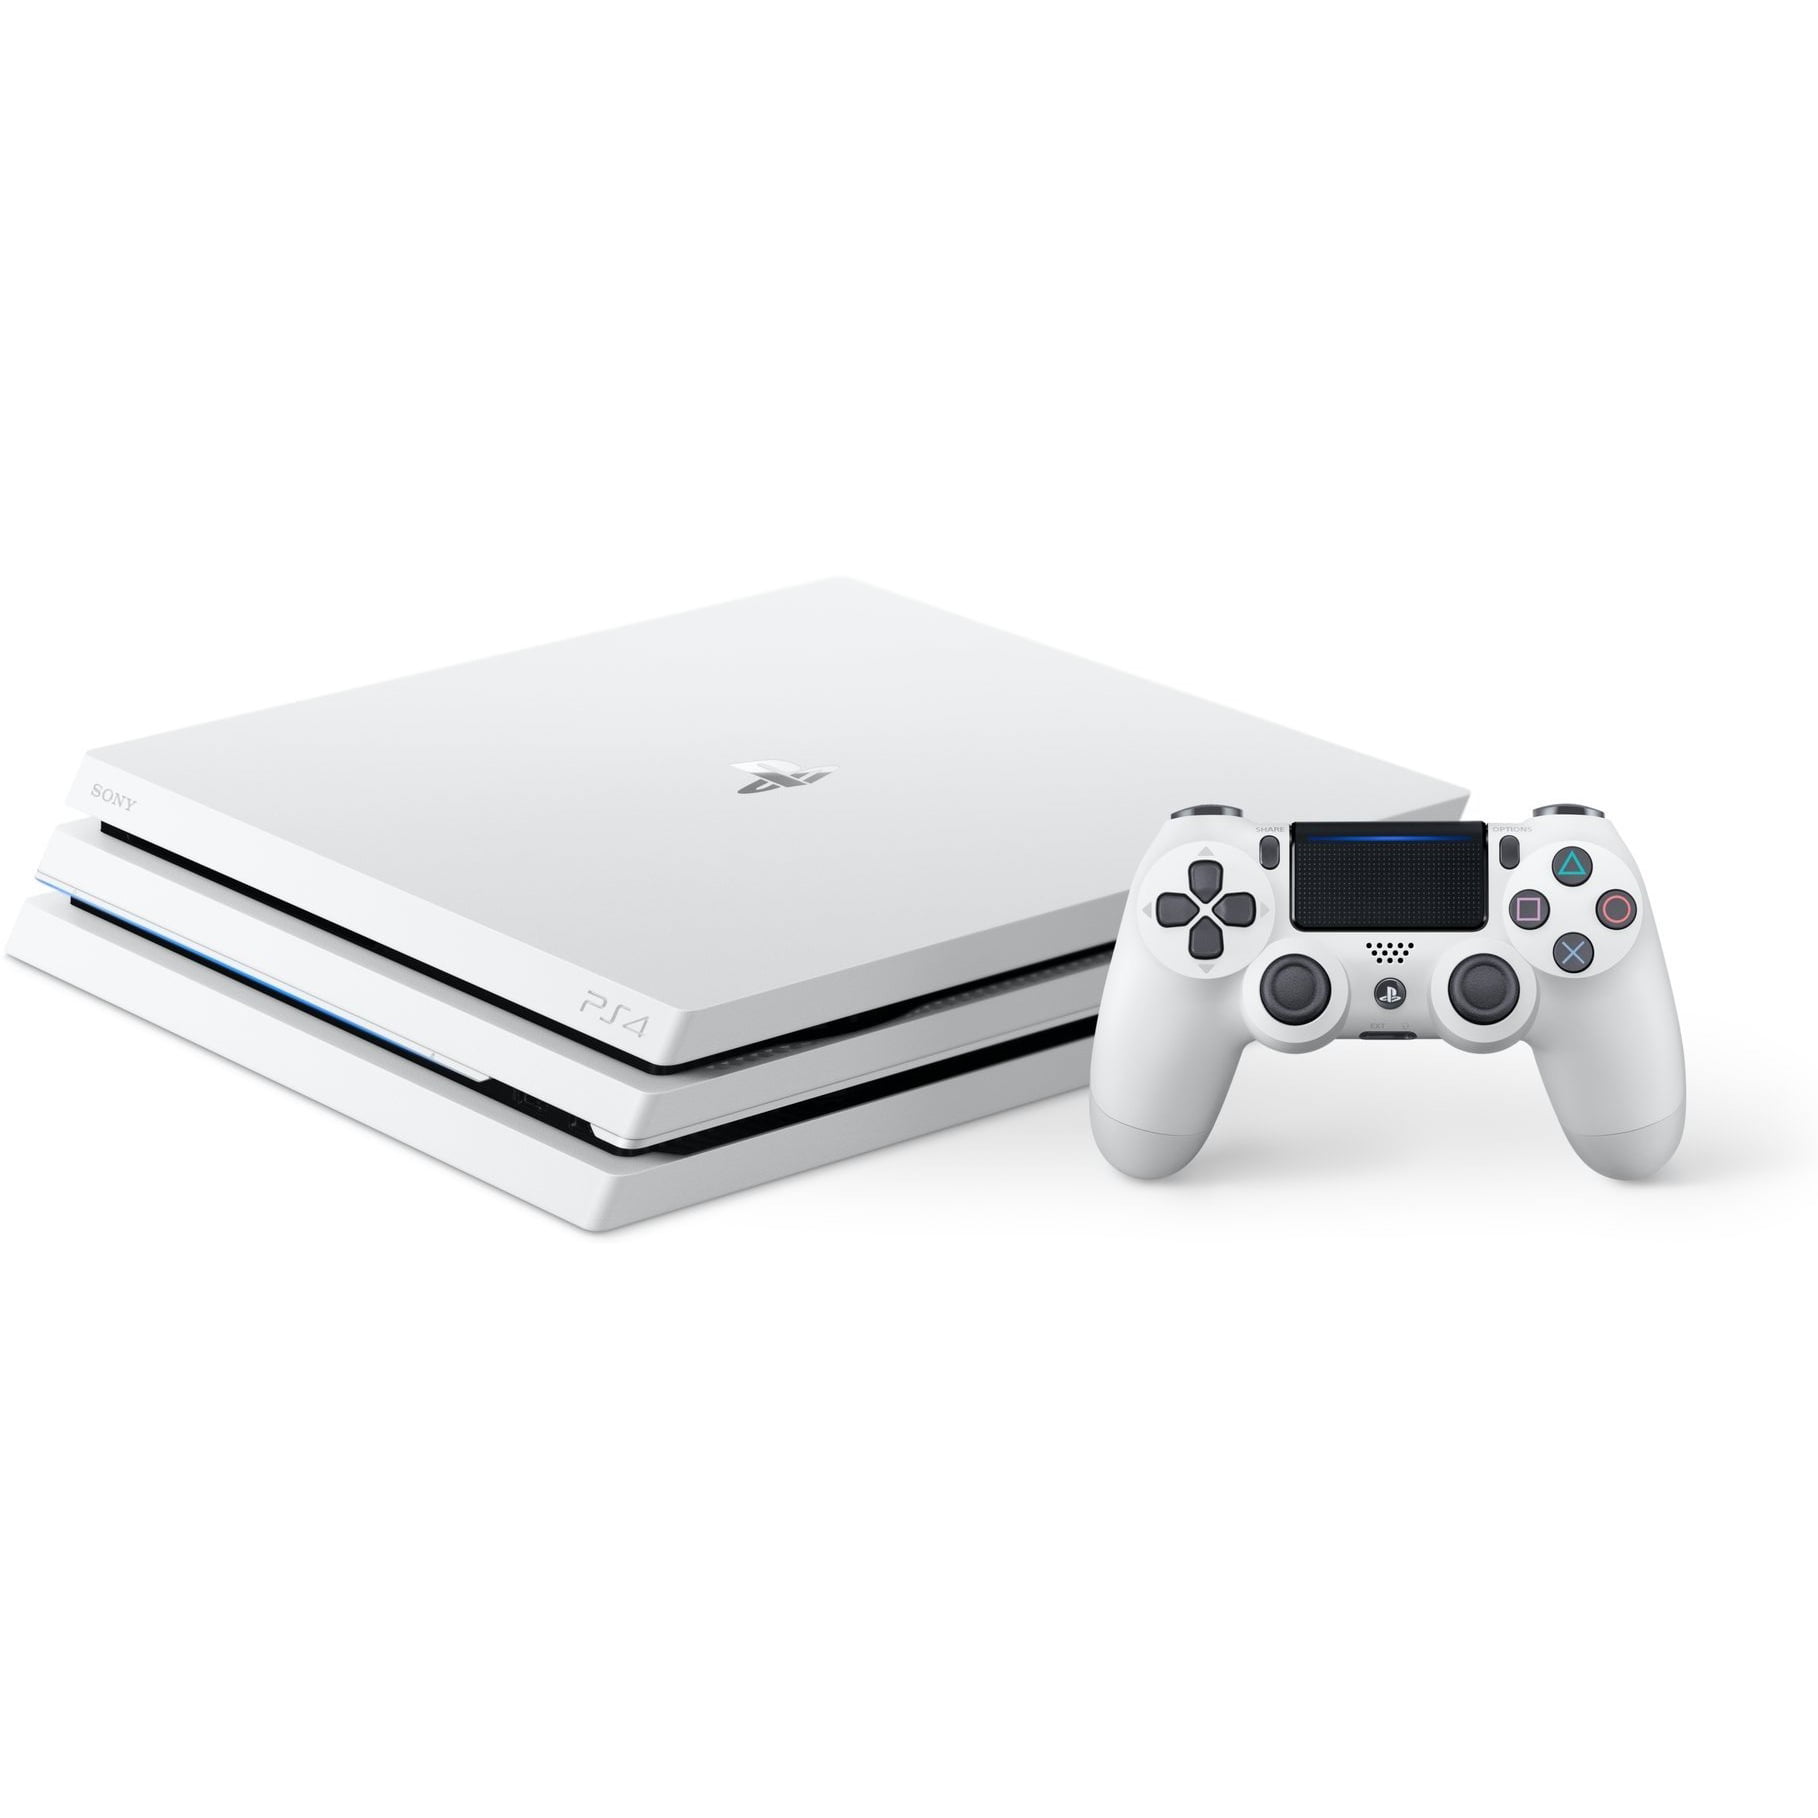 Sony PlayStation 4 Pro 1TB Limited Edition Console - White (Used